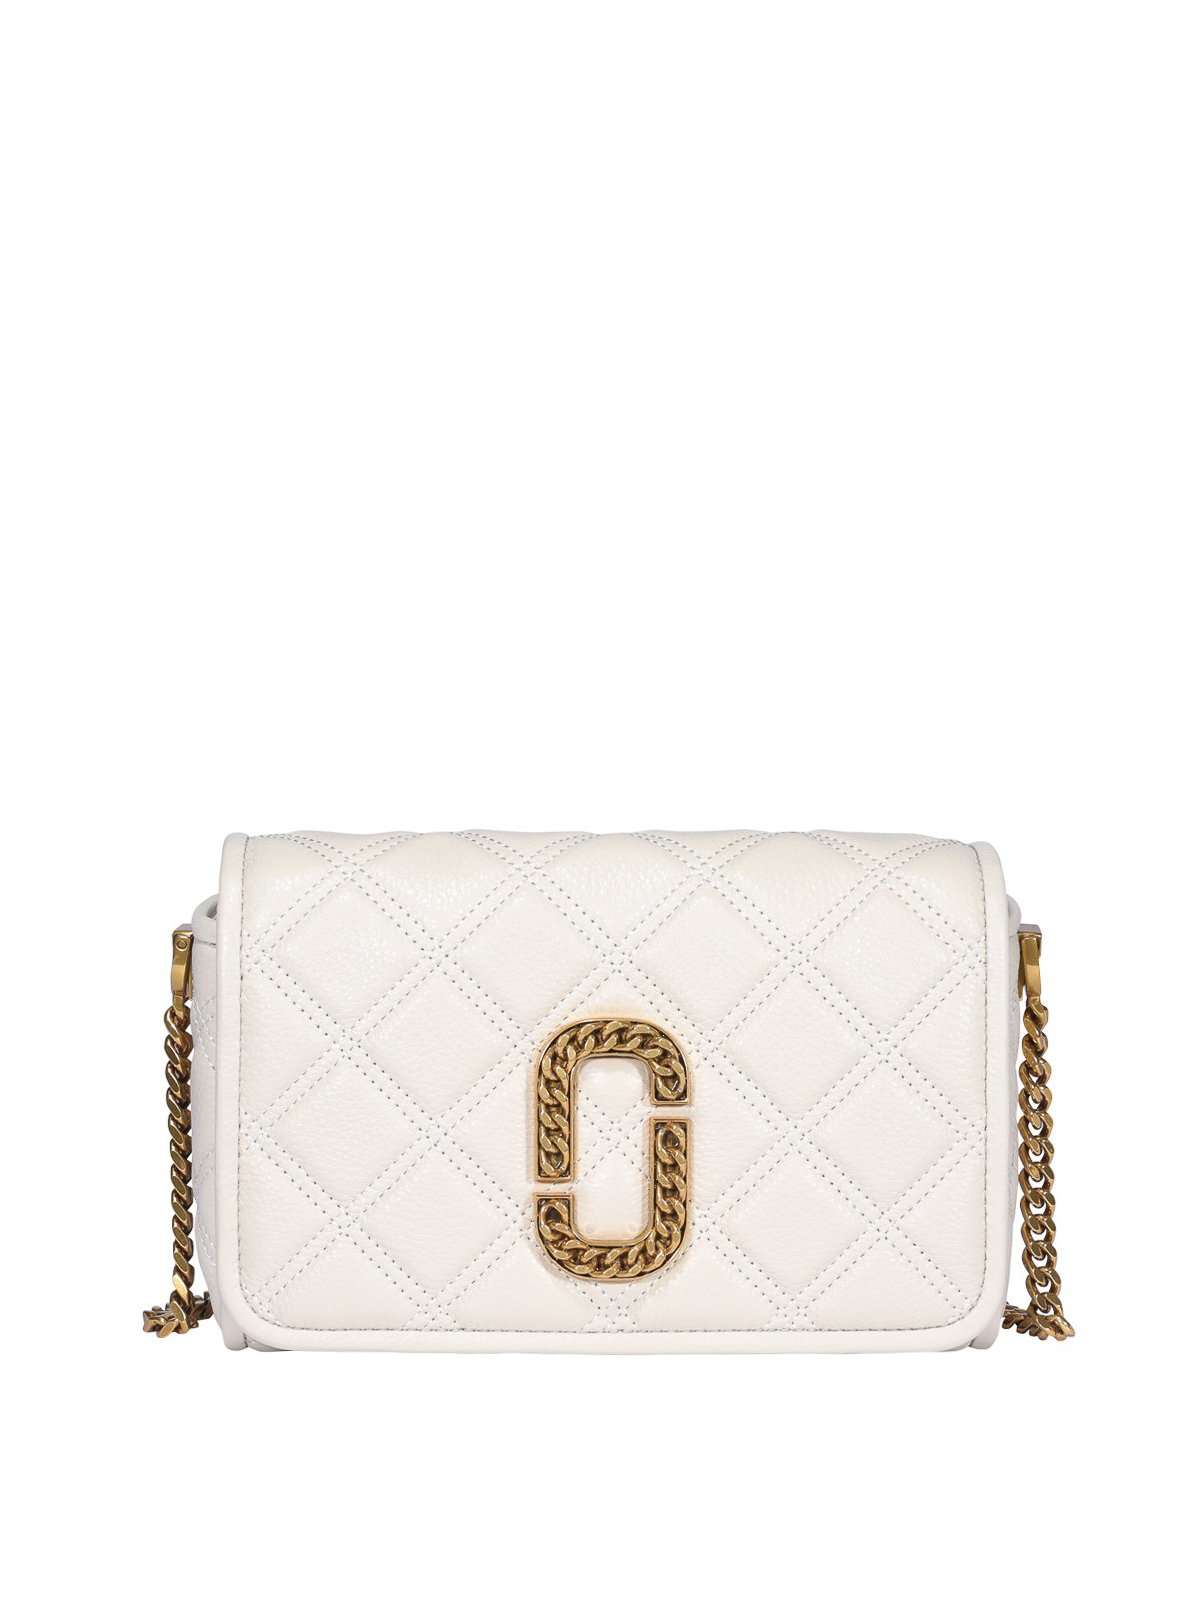 Marc Jacobs The Status Flap Bag in Natural